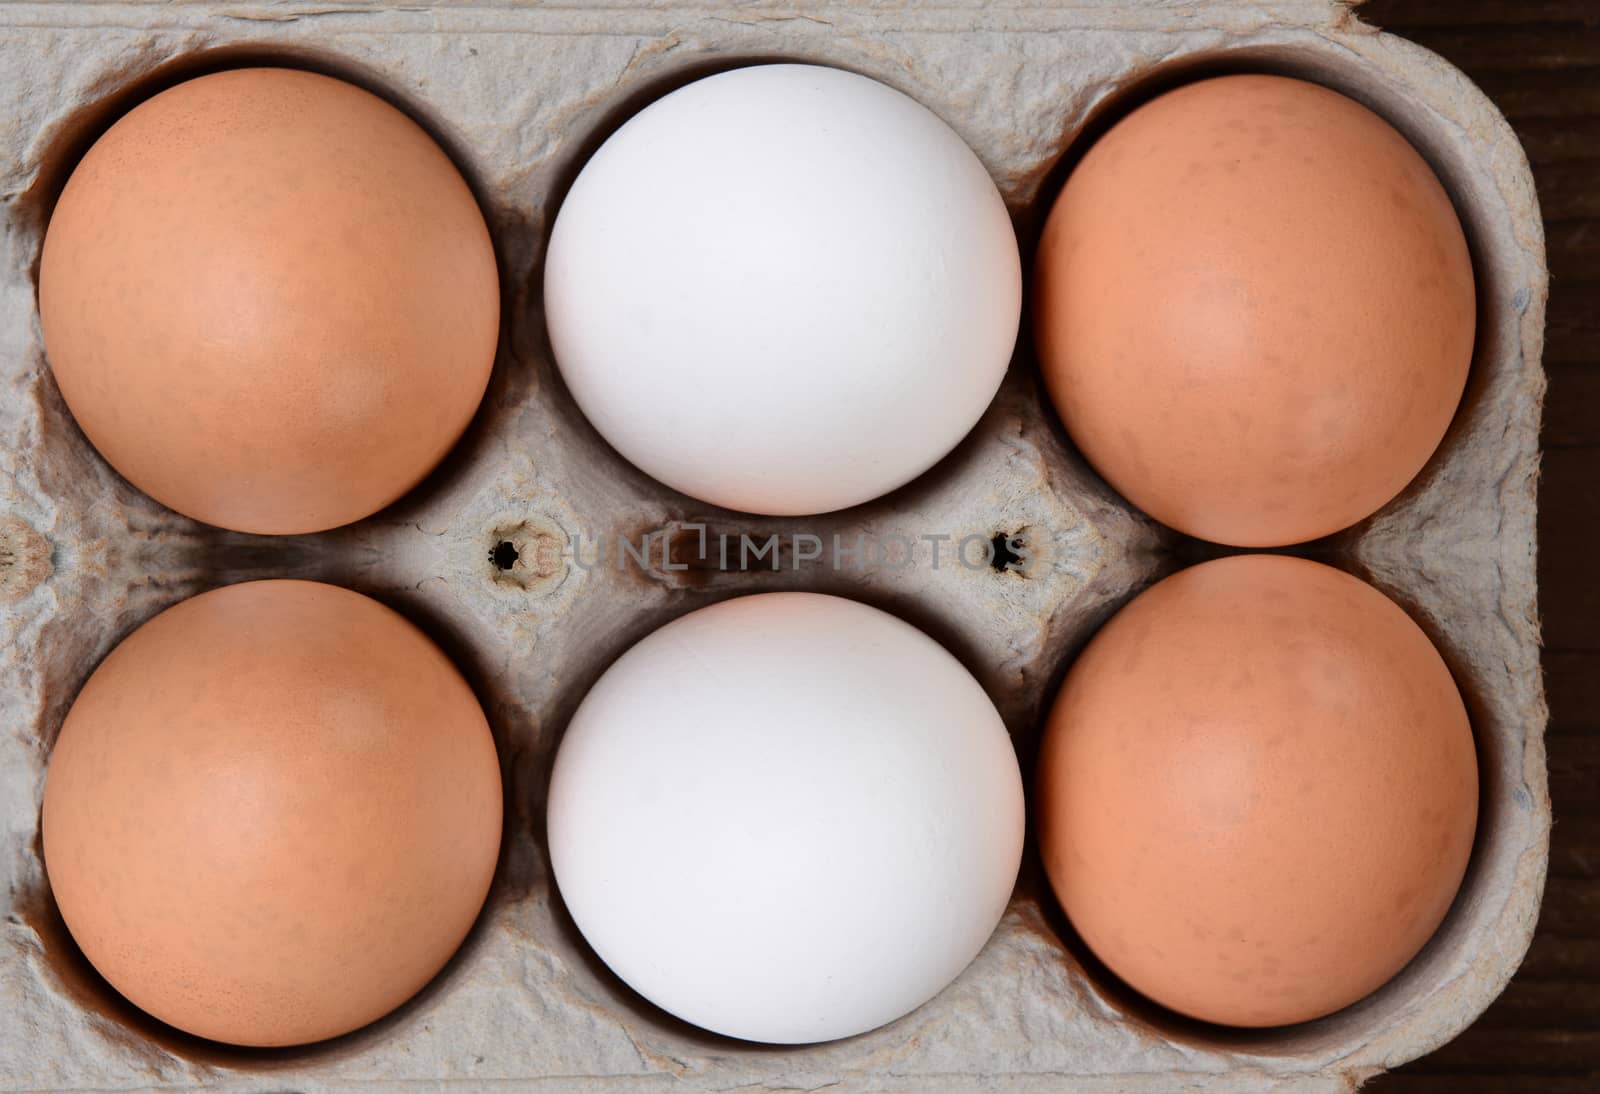 Brown and White Eggs in 6 Pack Carton by sCukrov